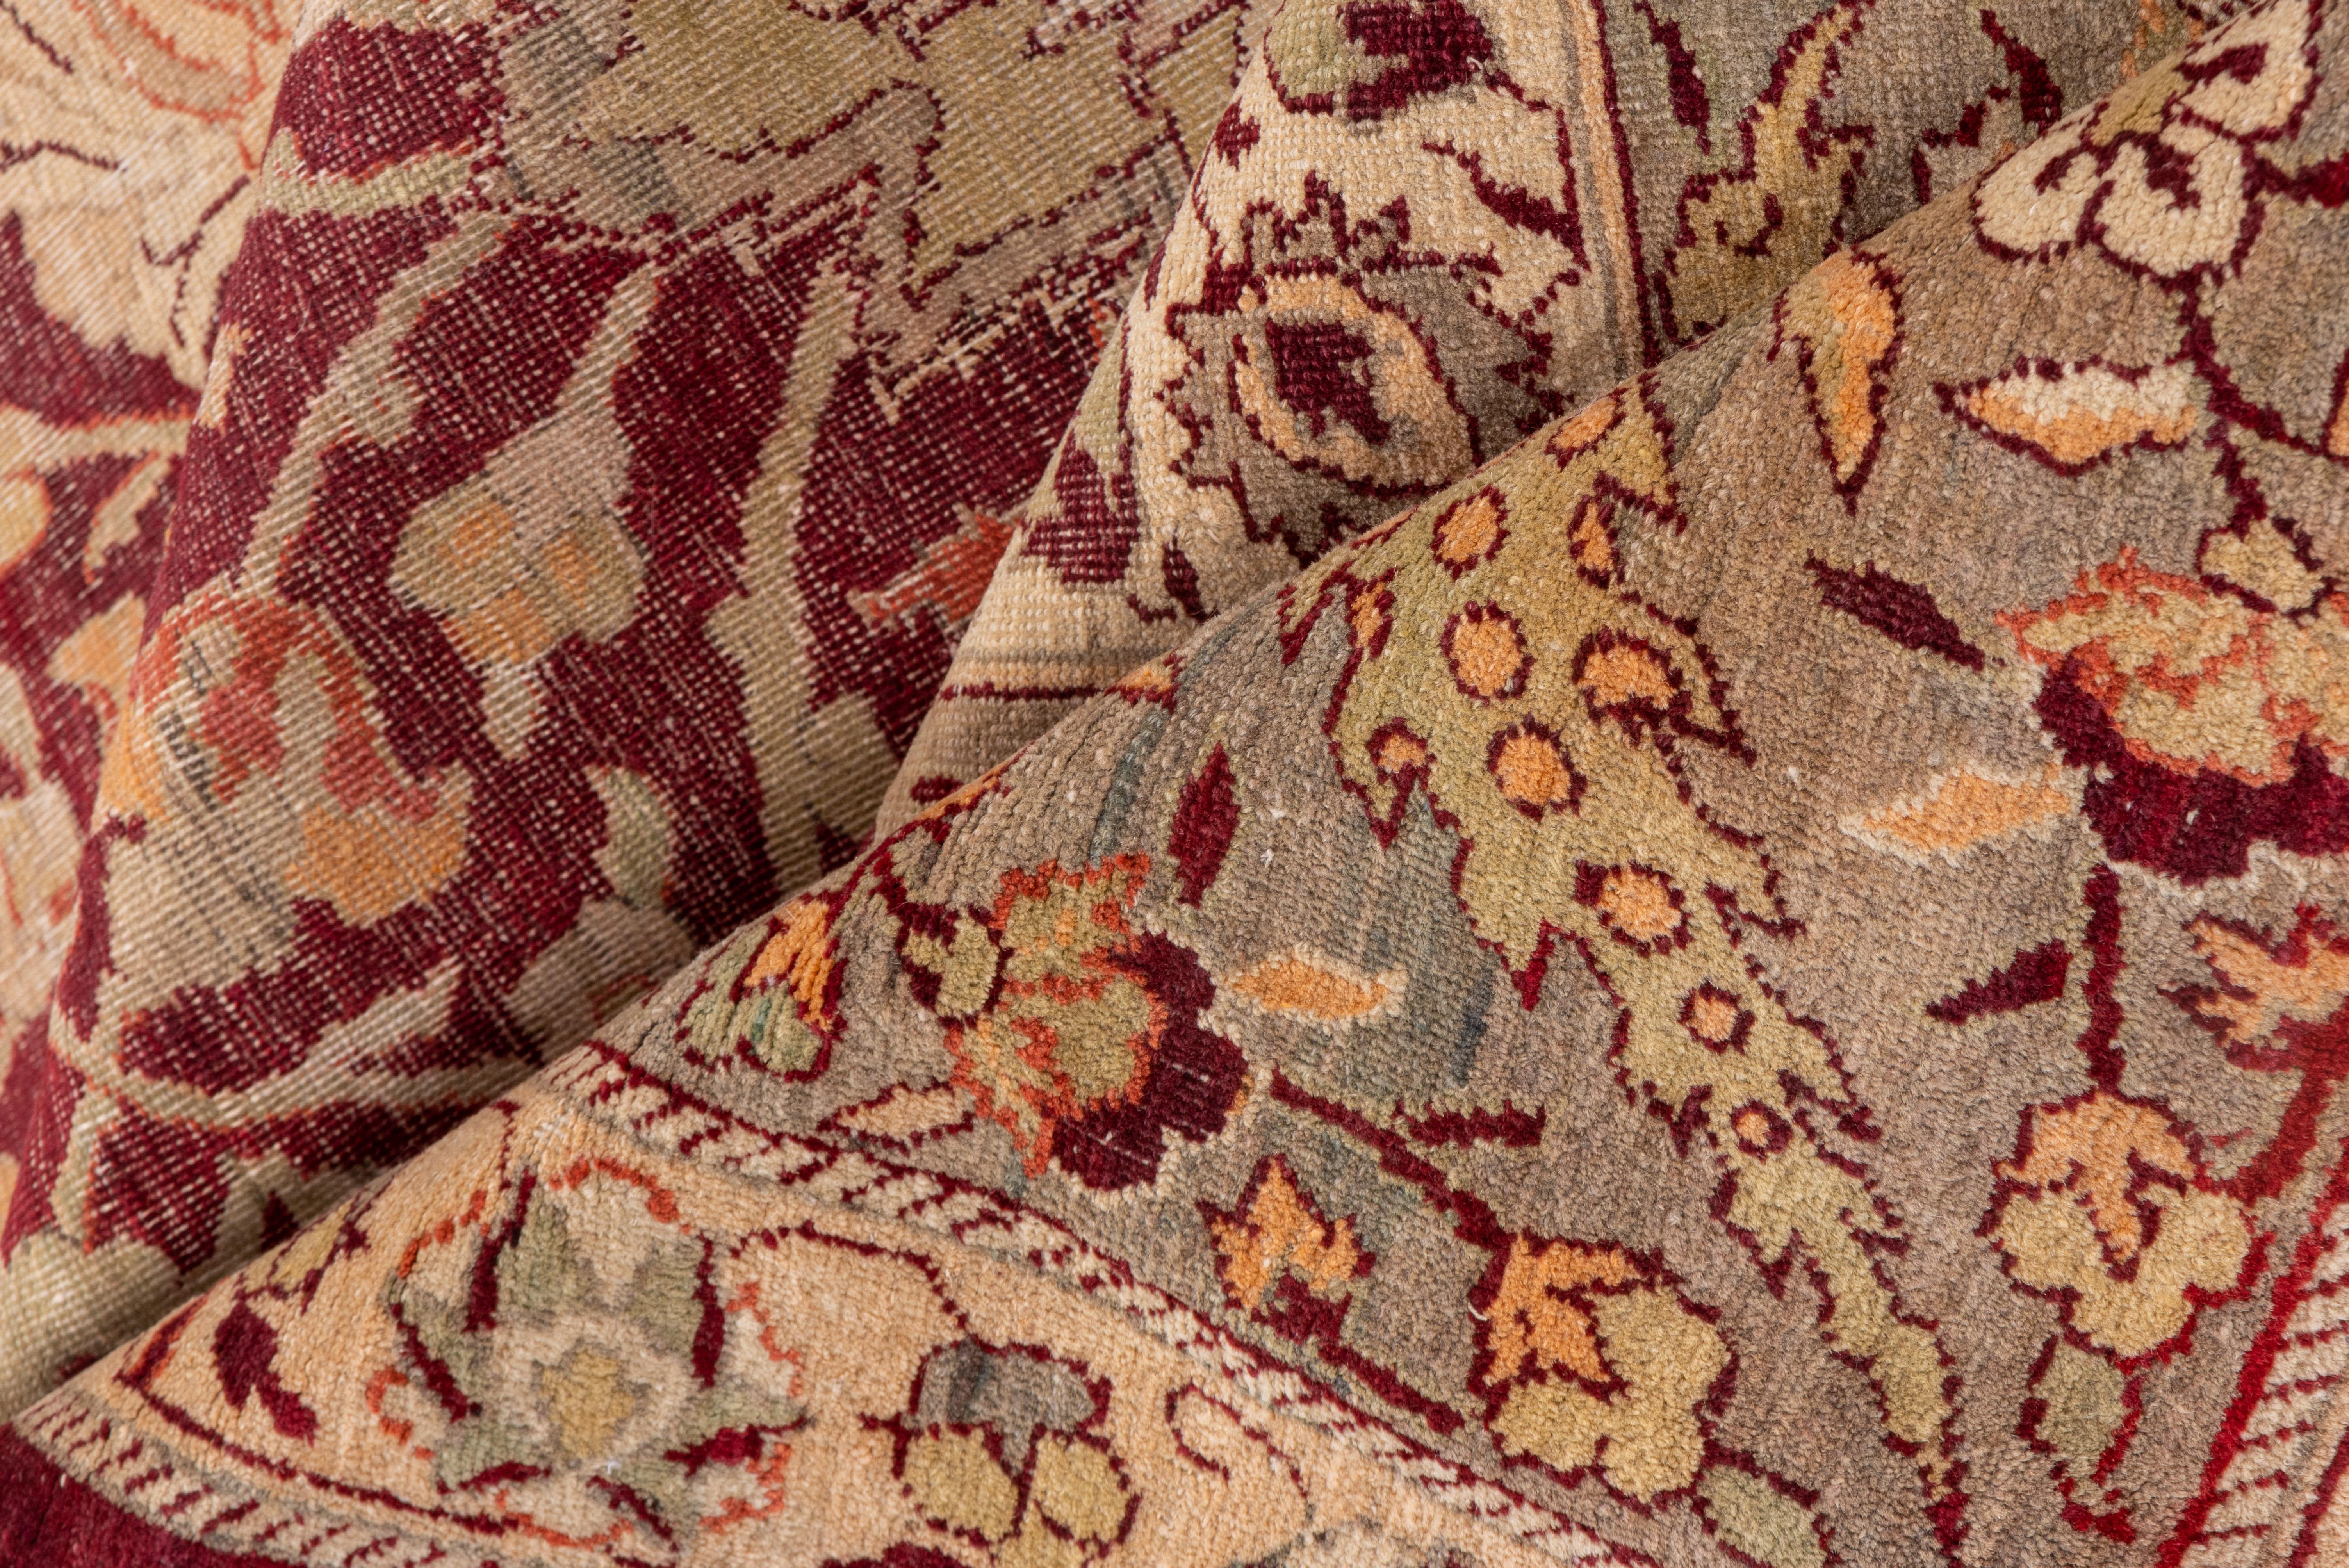 This northern Indian city carpet shows a wine red field in an all-over rounded palmette, rosette and short 